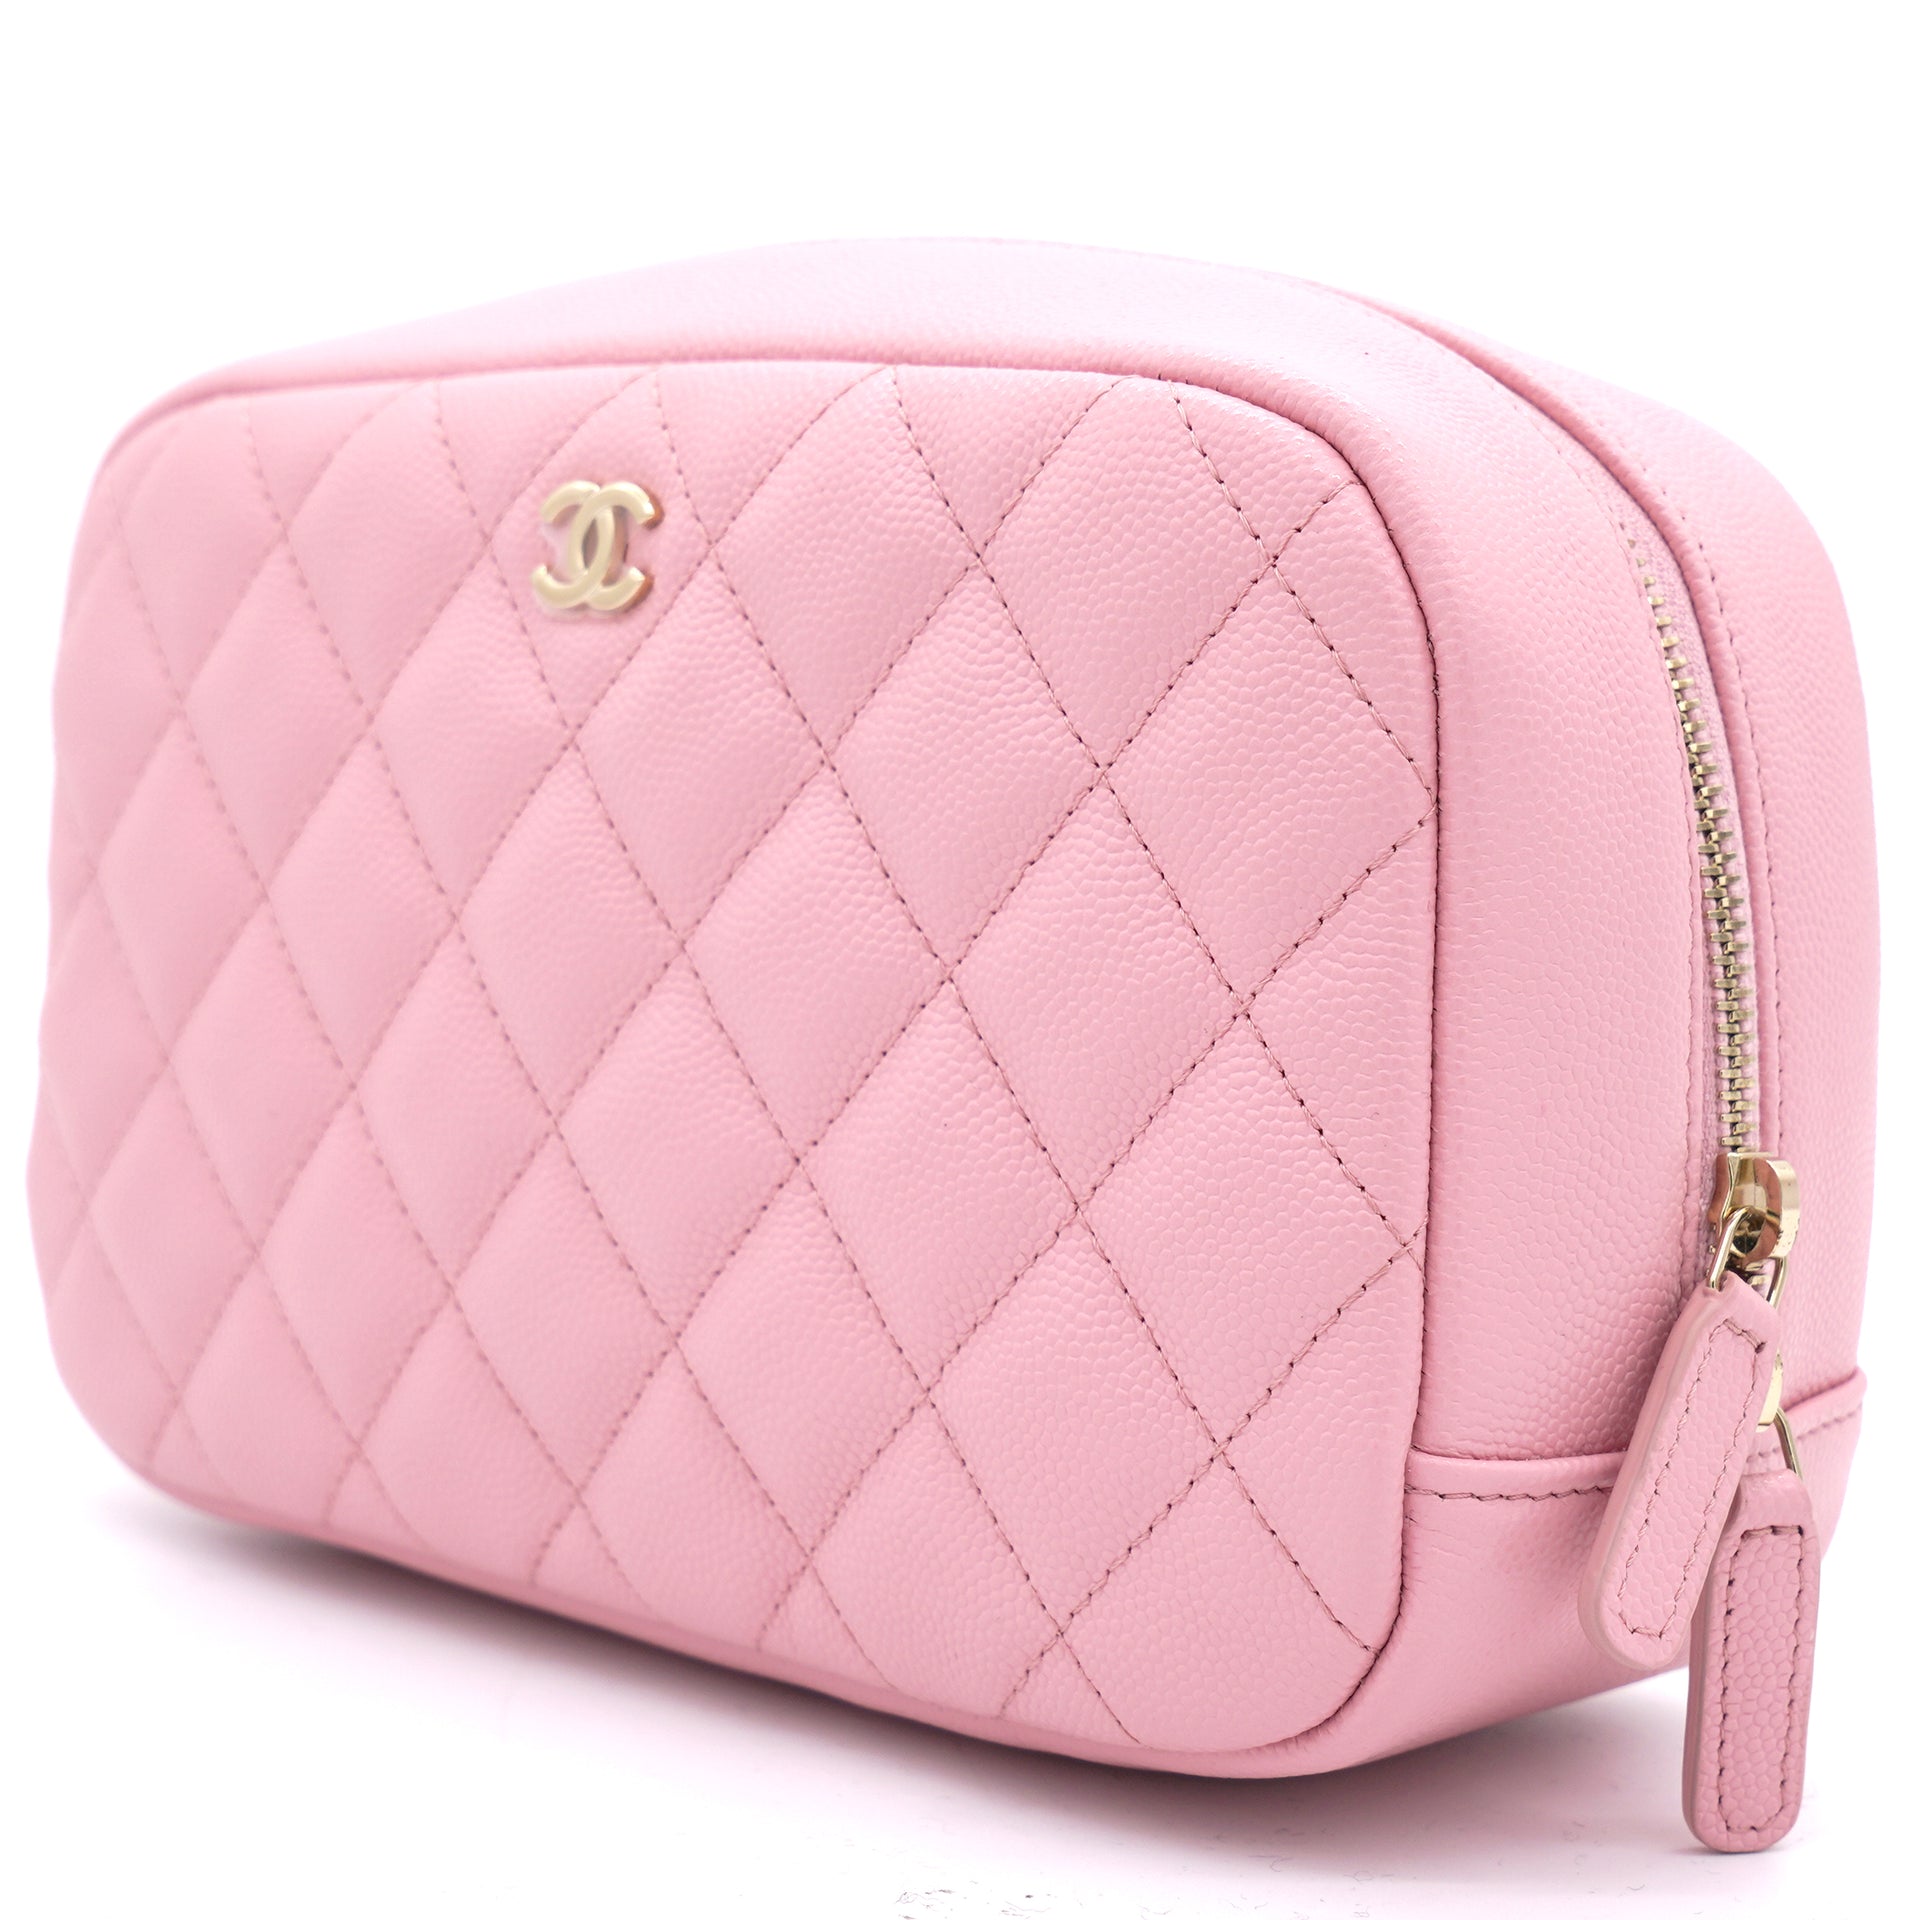 Chanel Quilted Makeup Bag